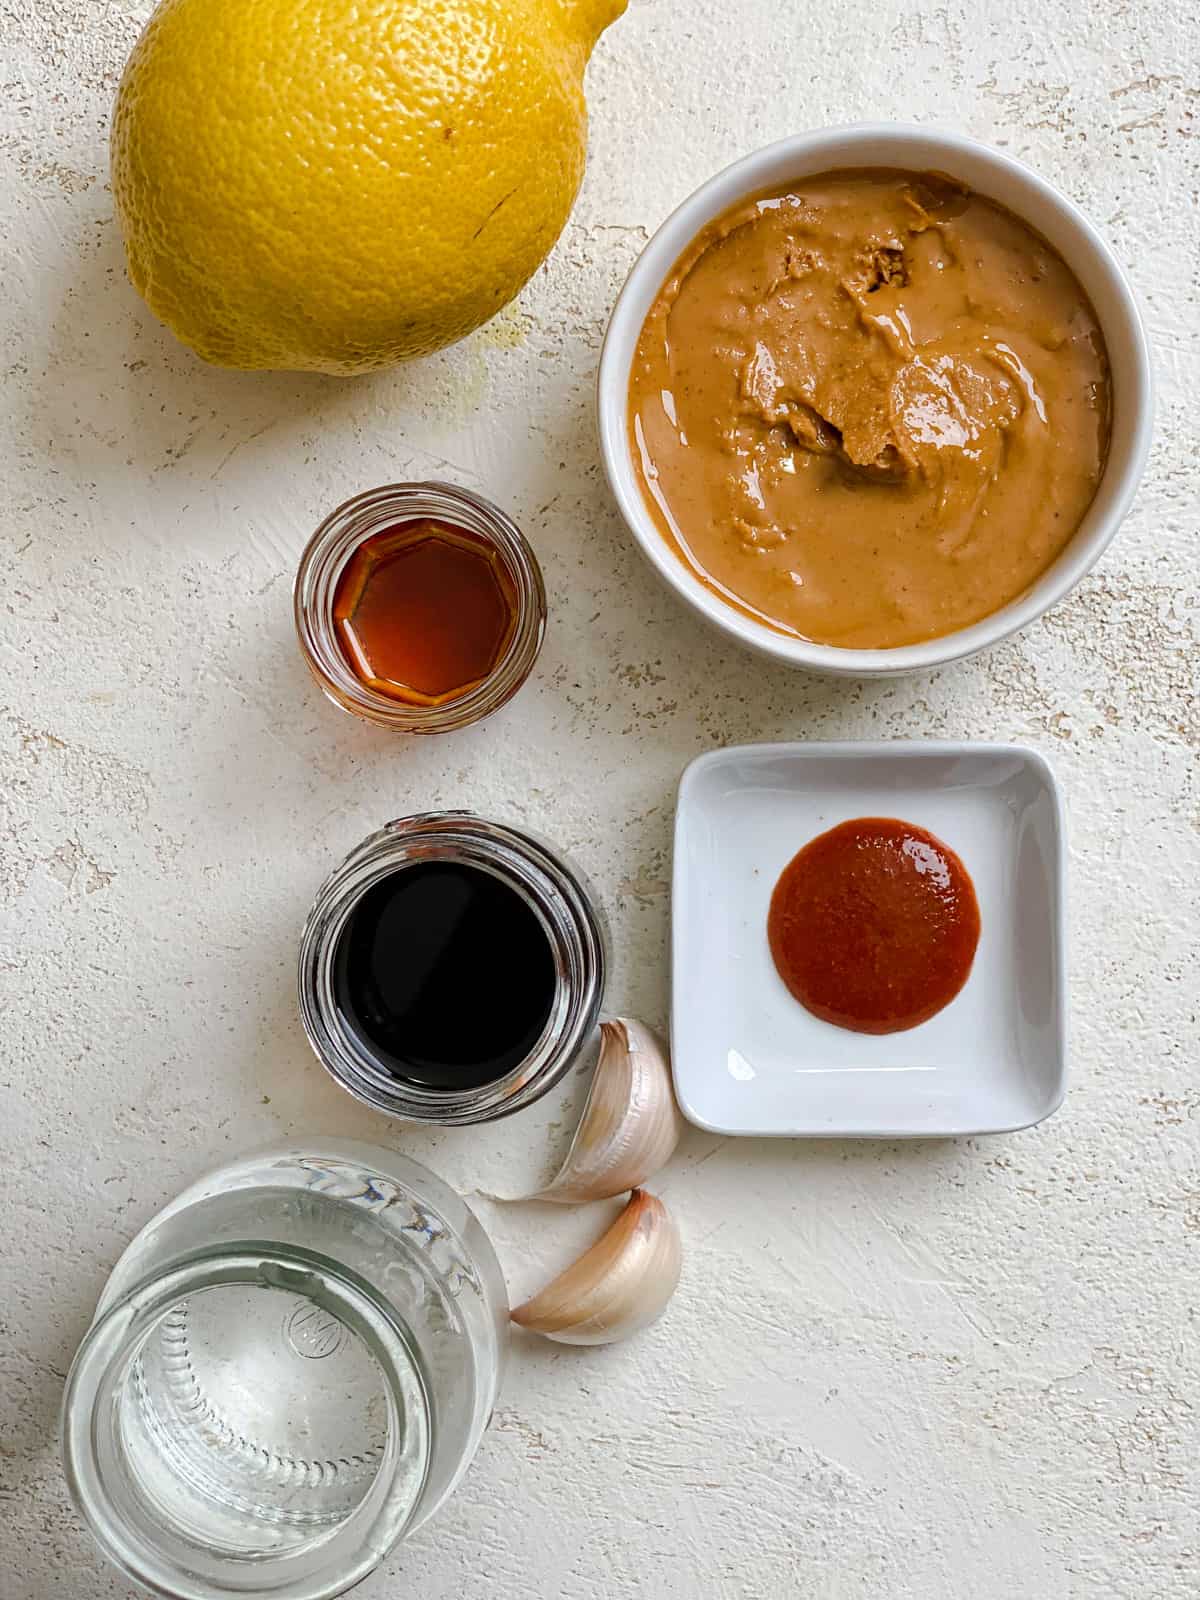 ingredients for Spicy Peanut Dipping Sauce measured out against a light surface